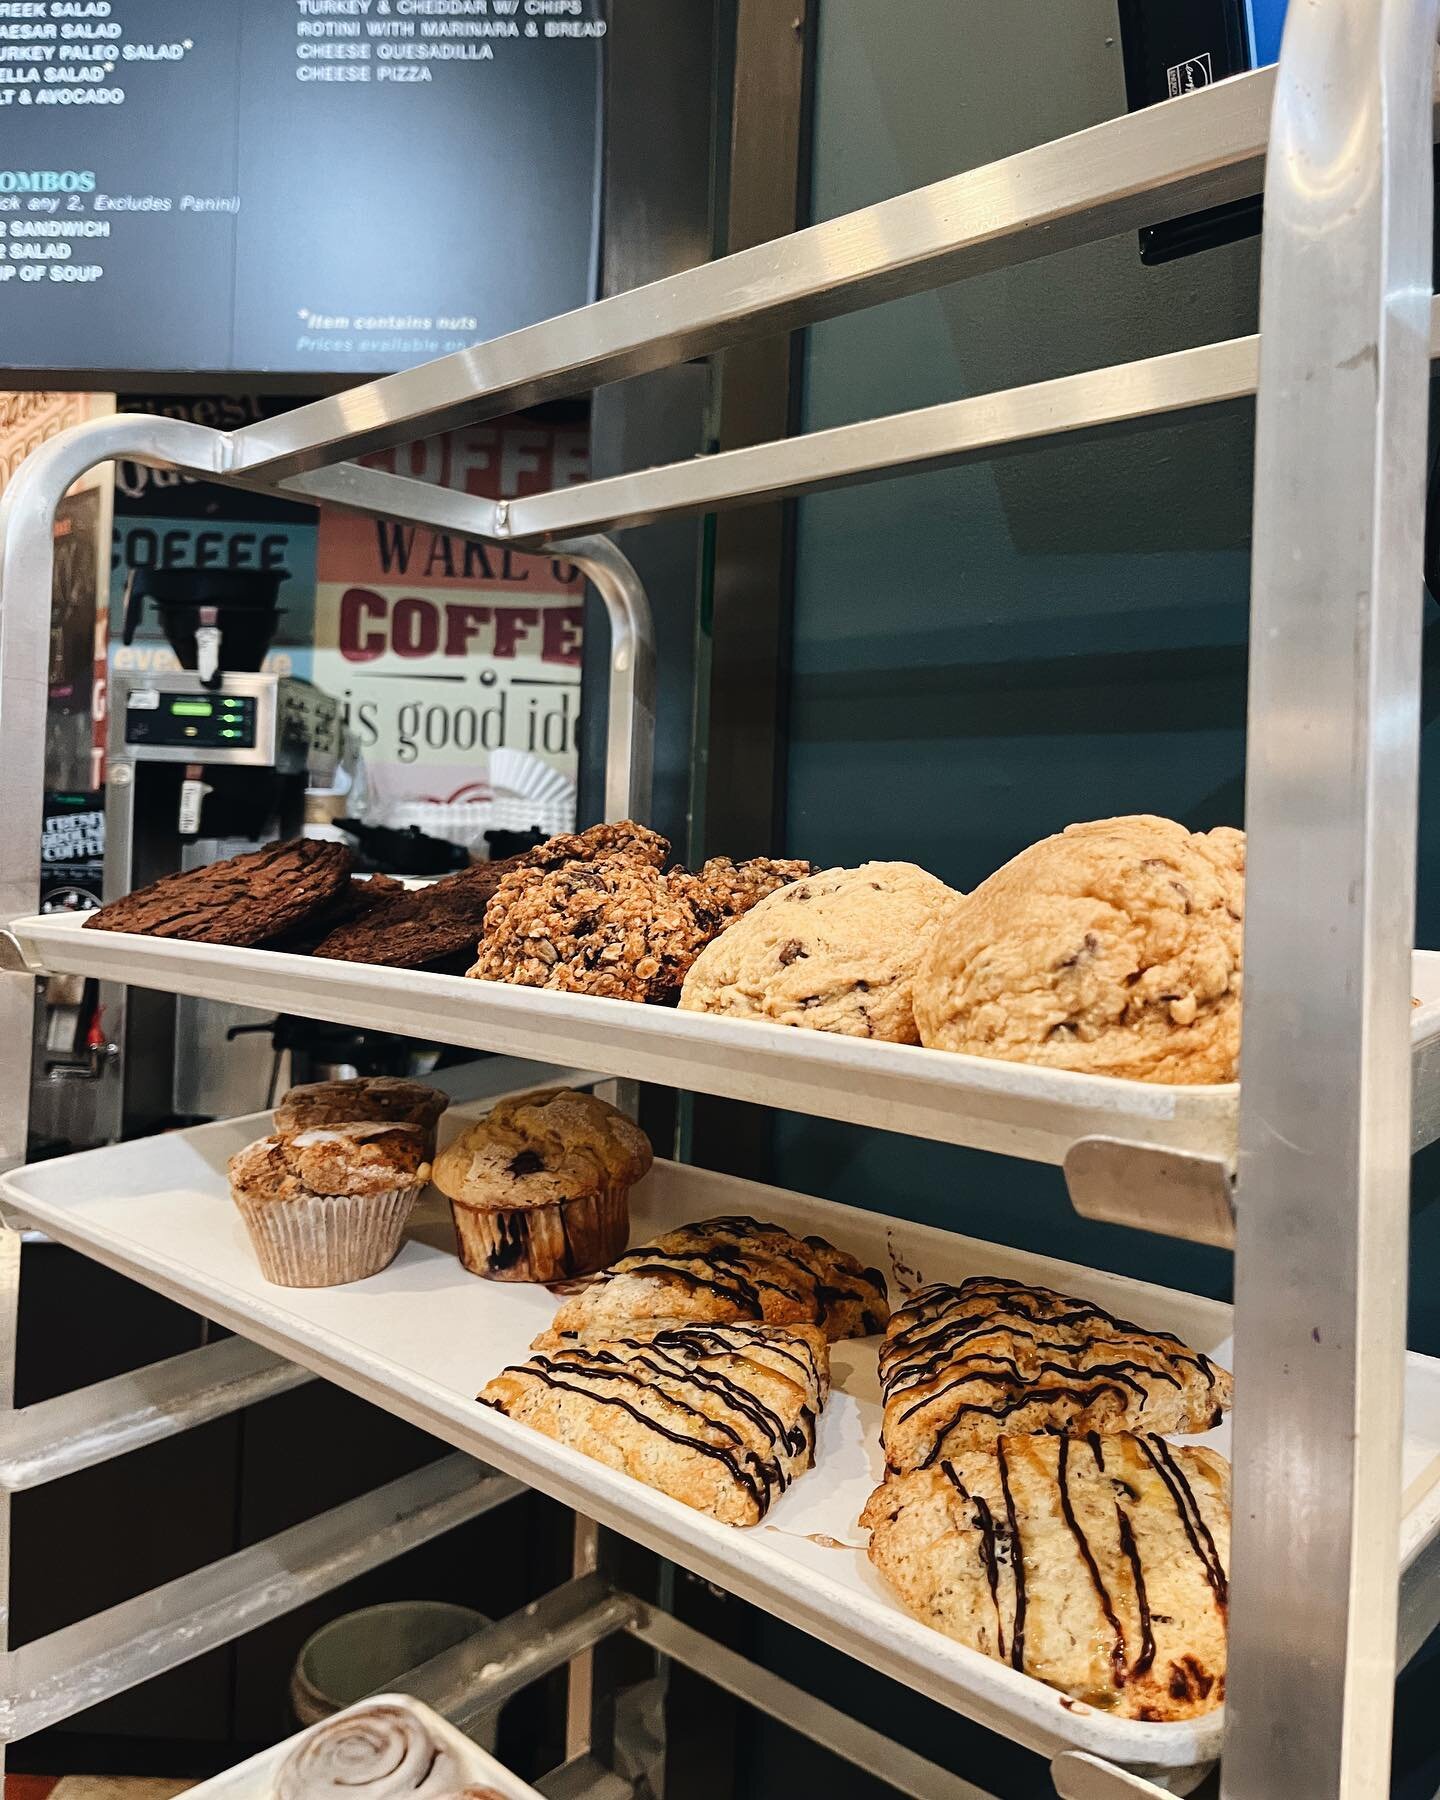 To anyone with a sweet tooth&hellip;we are the place for you😍🍪. We have delicious cookies and other sweet pastries in our bakery every day!